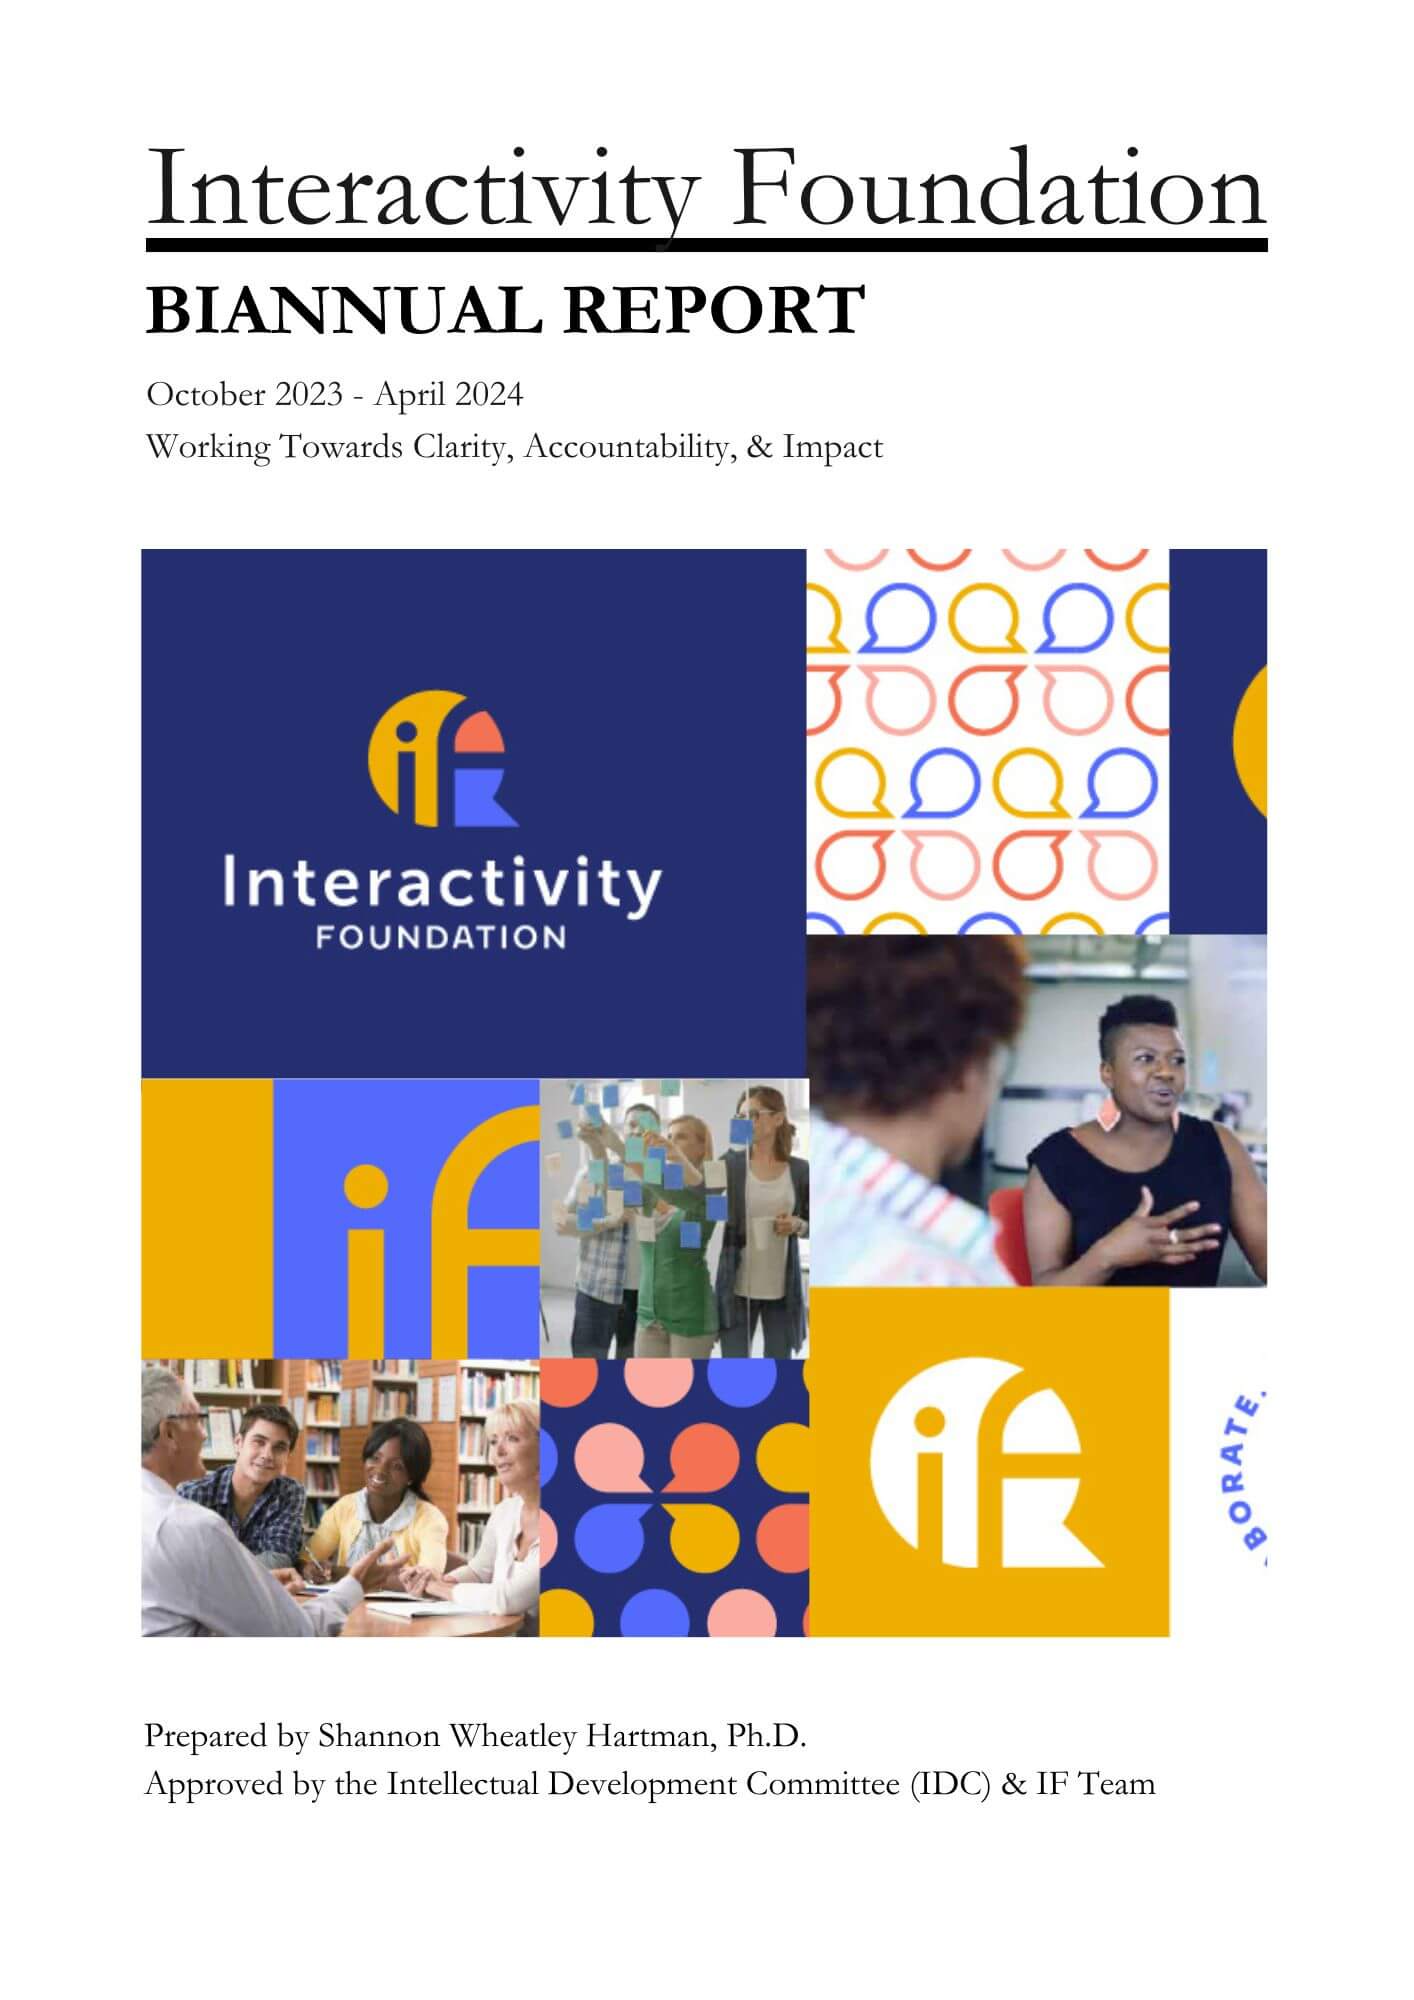 Cover Page of April 2024 Biannual Report